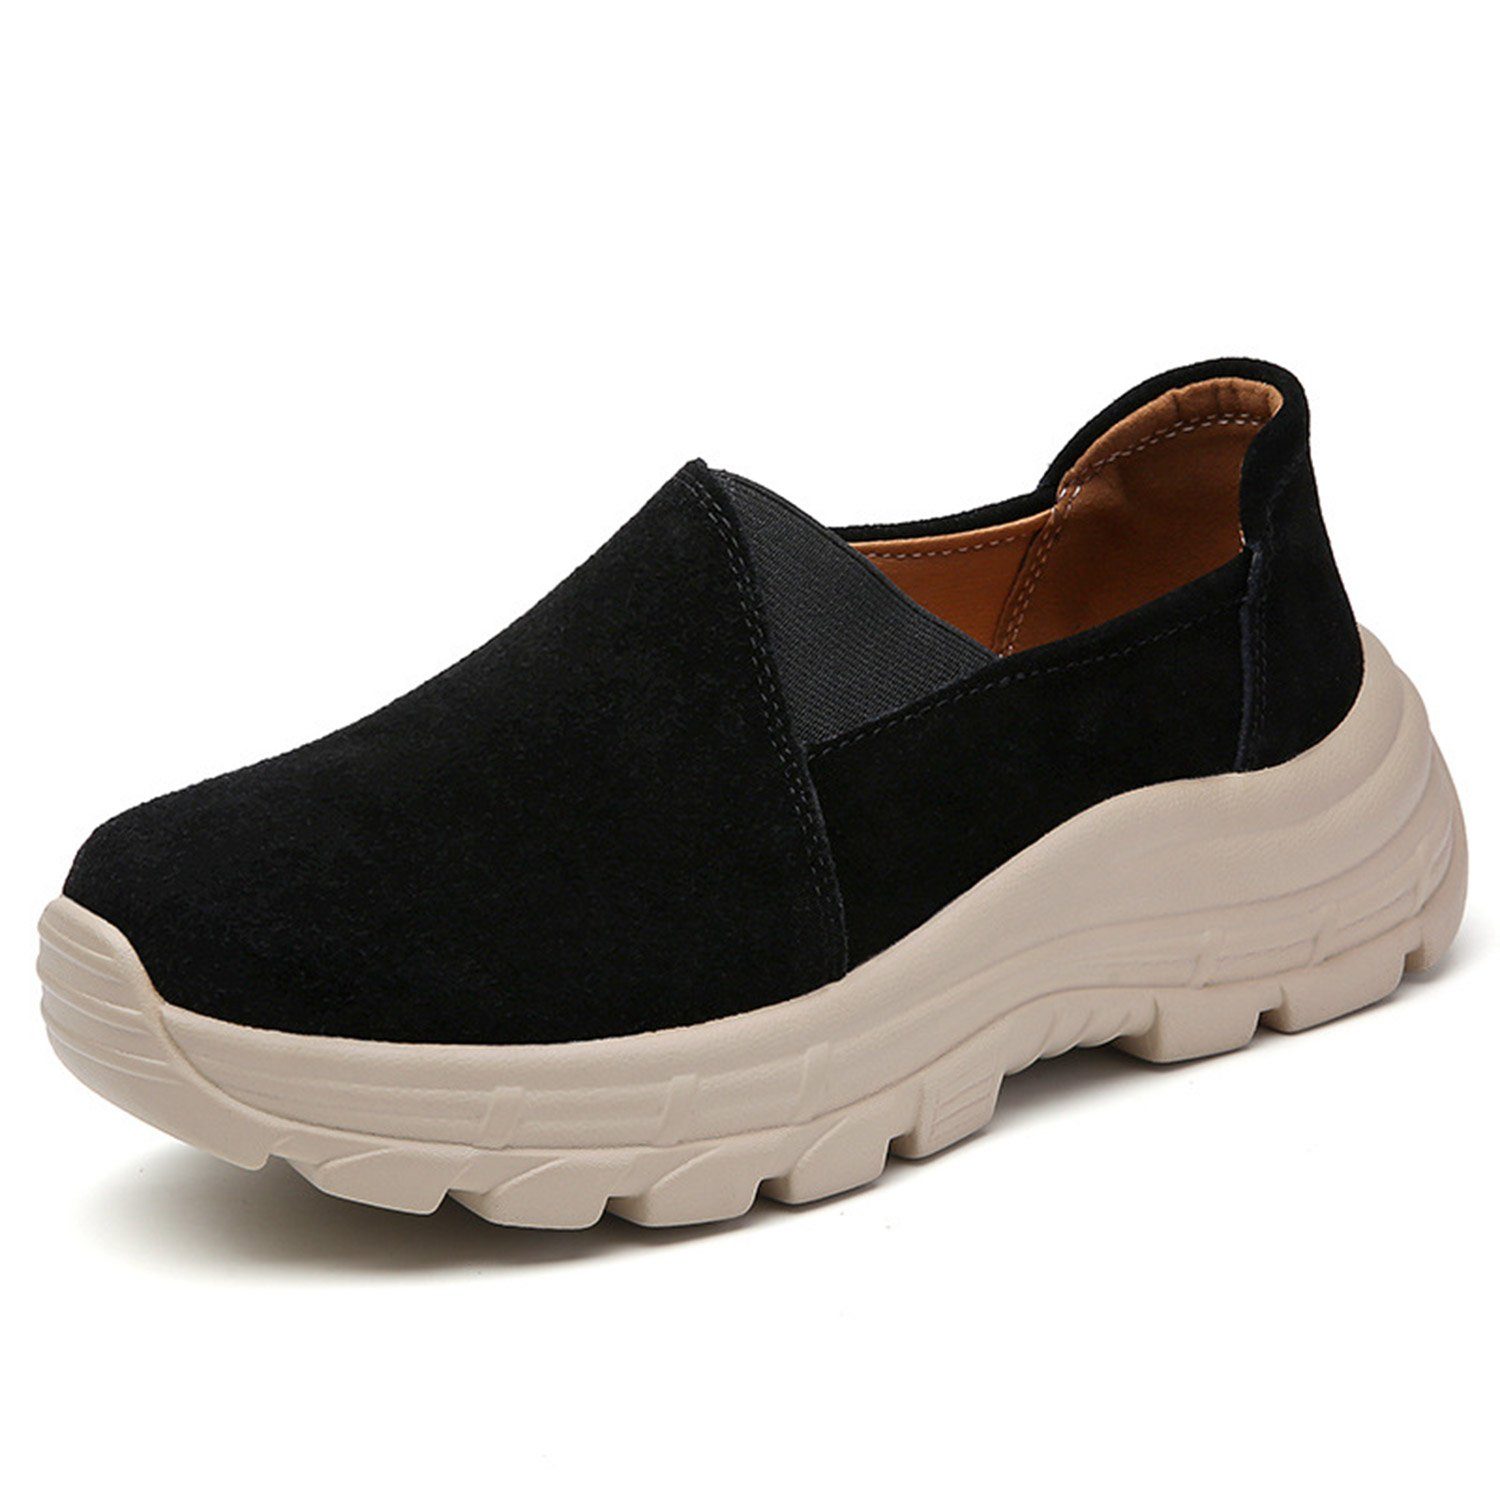 mit Turnschuhe Schwarz Daisred Sneakers Loafer Bequeme Plateausohle